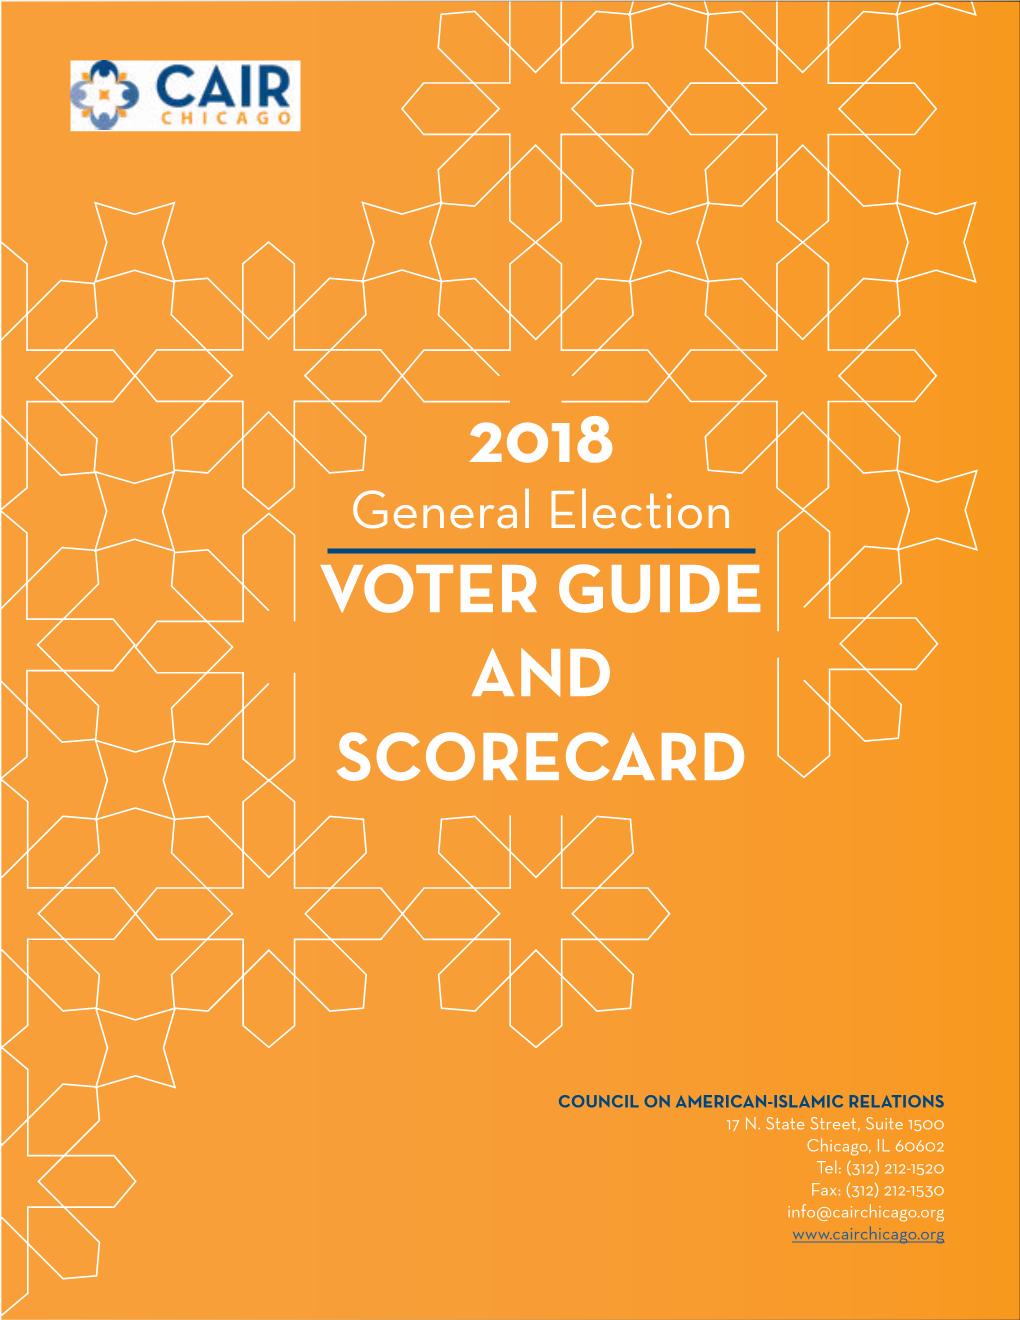 Voter Guide and Scorecard